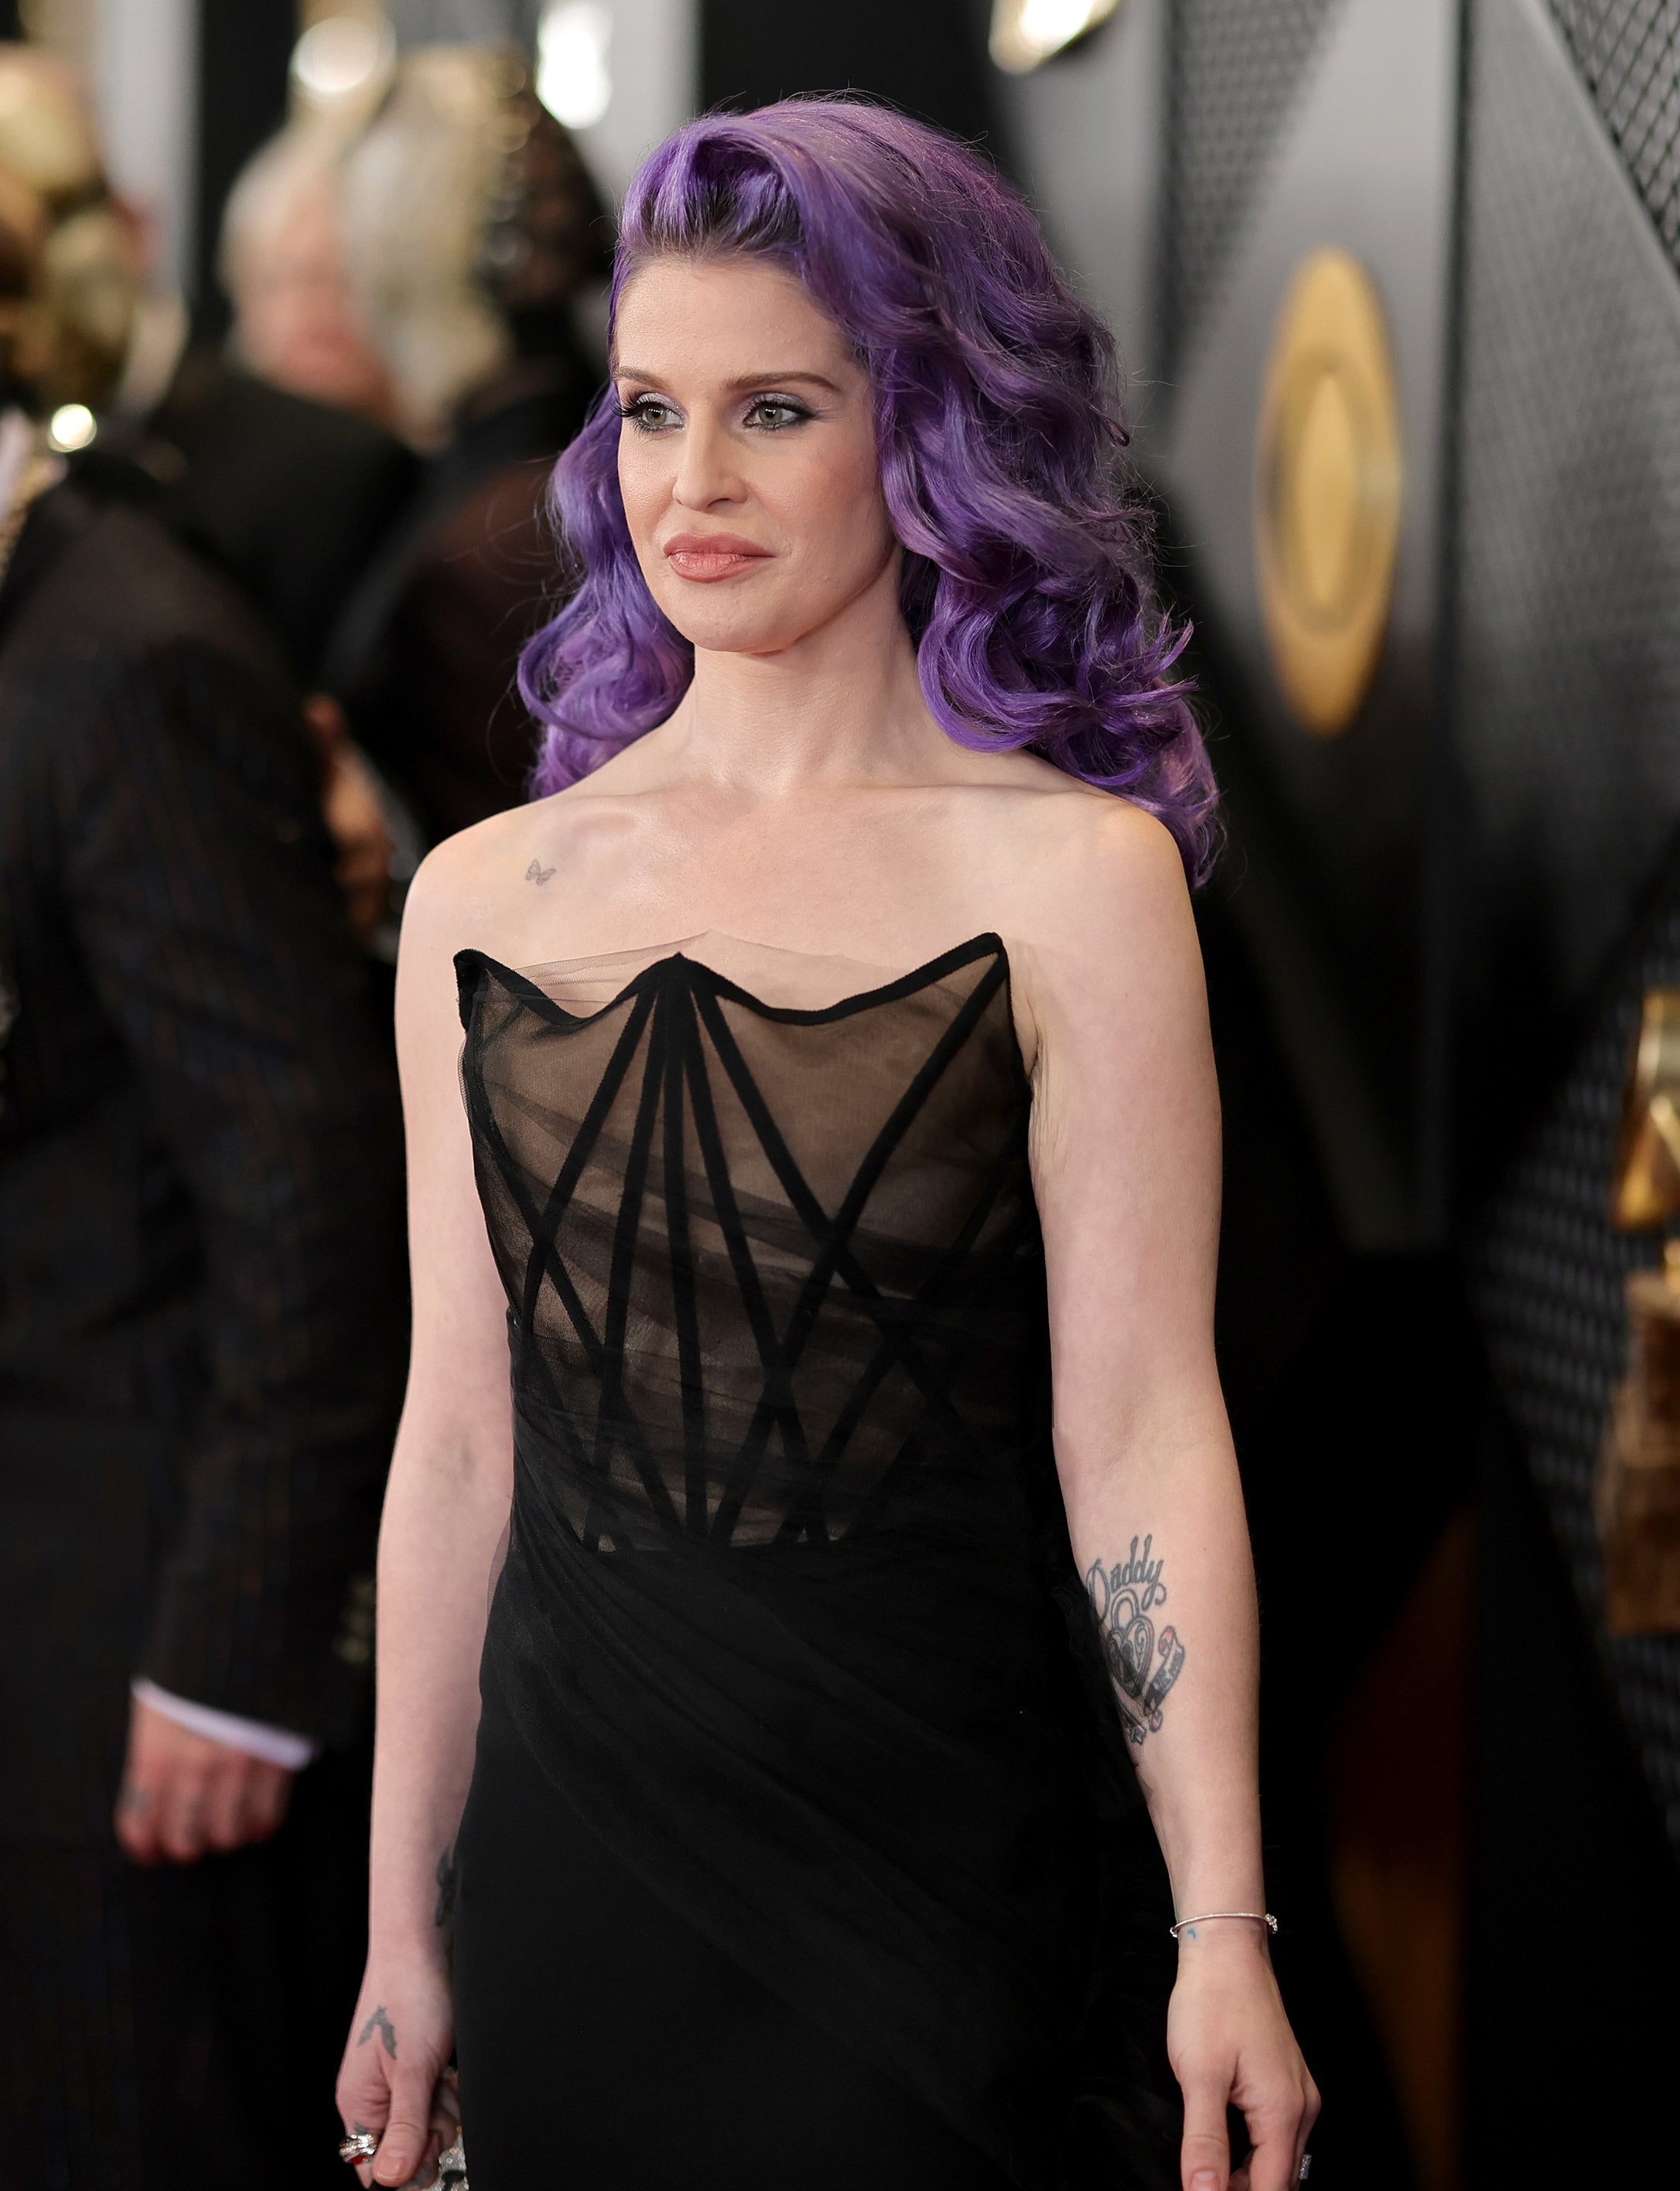 Woman with purple hair in a black dress on the red carpet